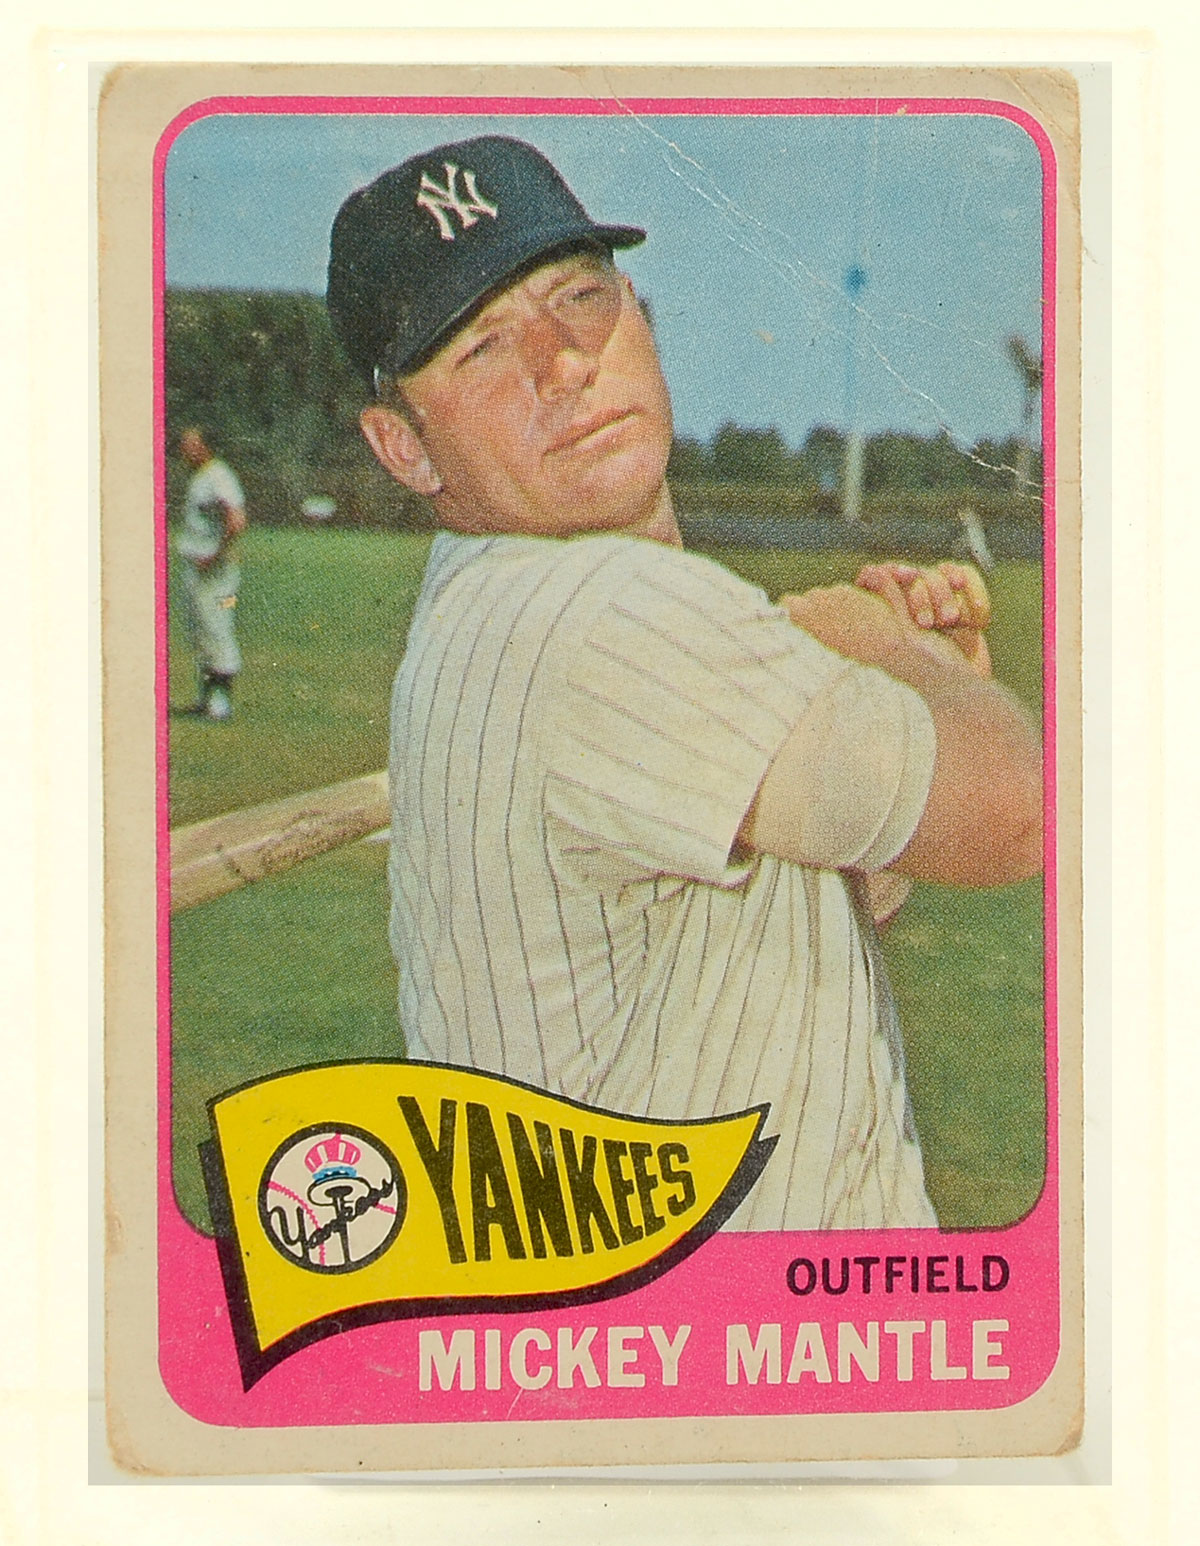 1969 TOPPS MICKEY MANTLE CARD,